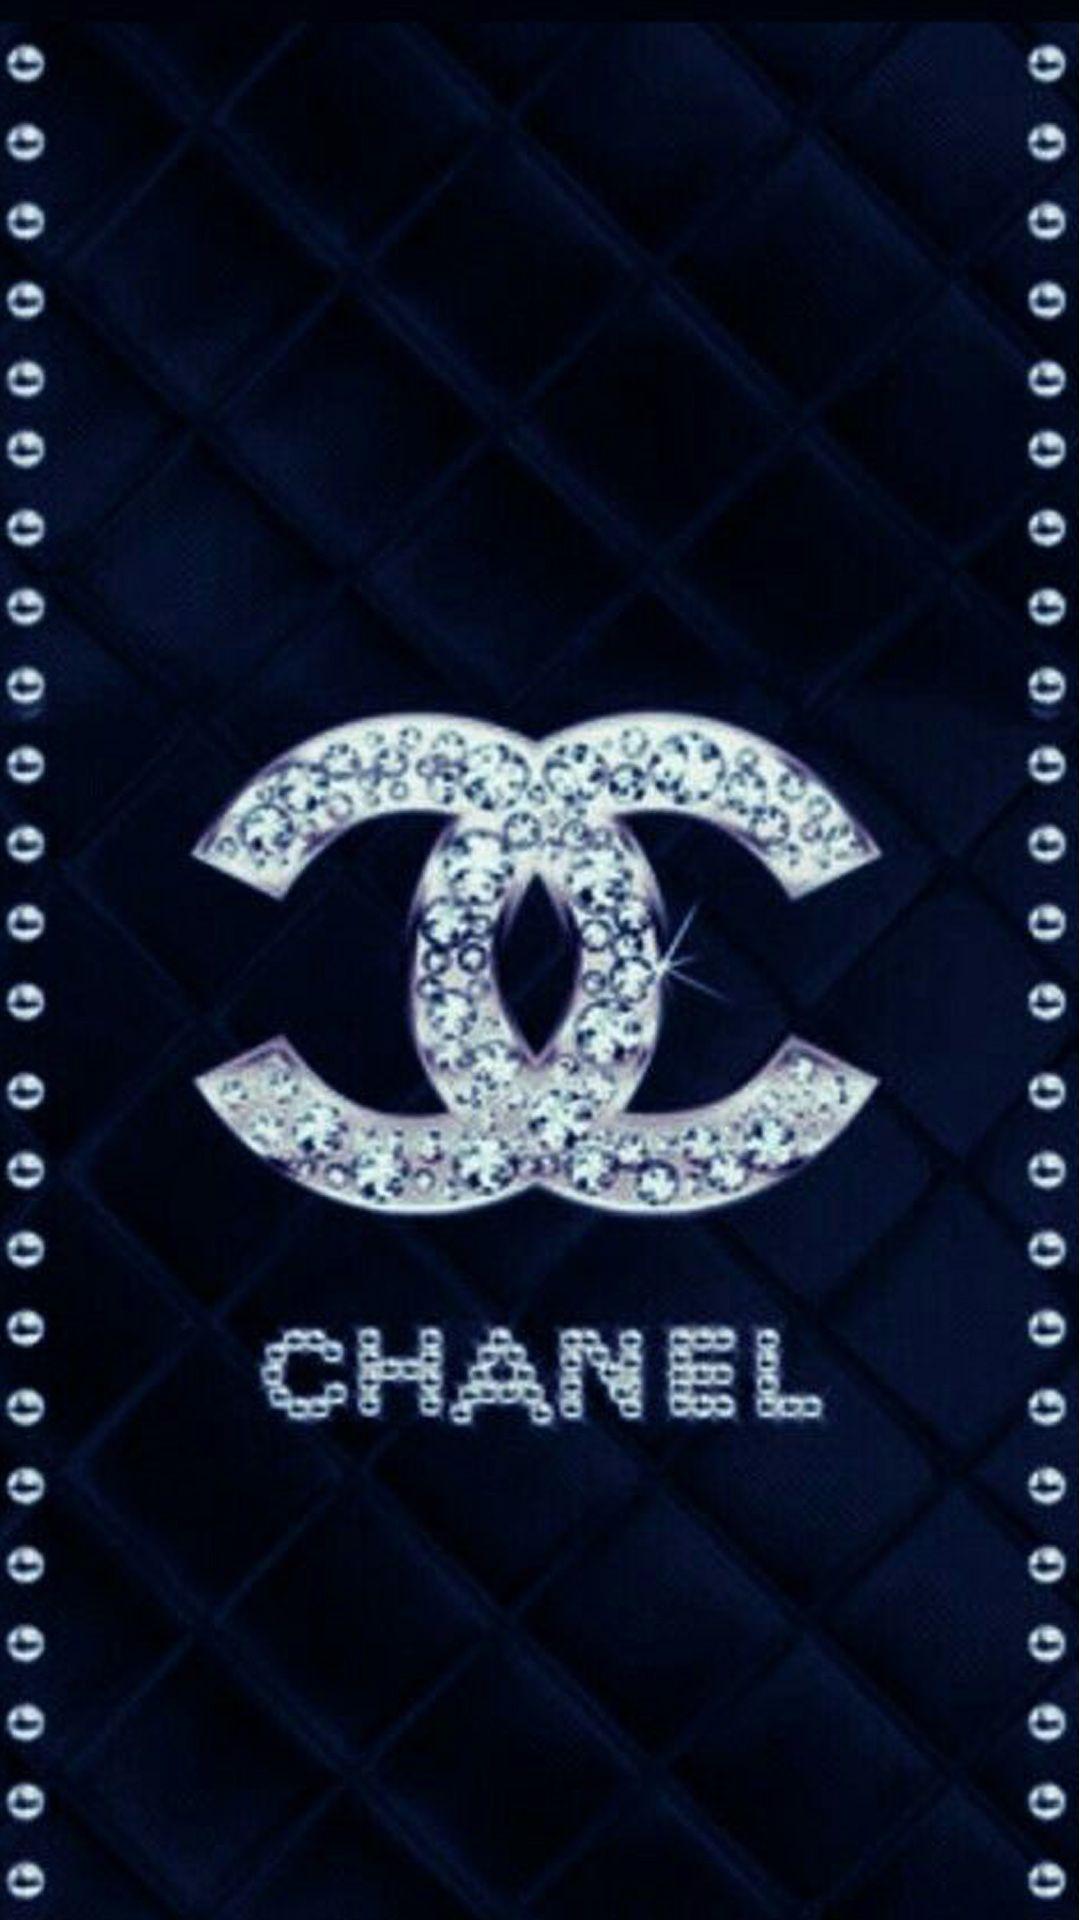 Chanel Girly Wallpapers Top Free Chanel Girly Backgrounds Wallpaperaccess